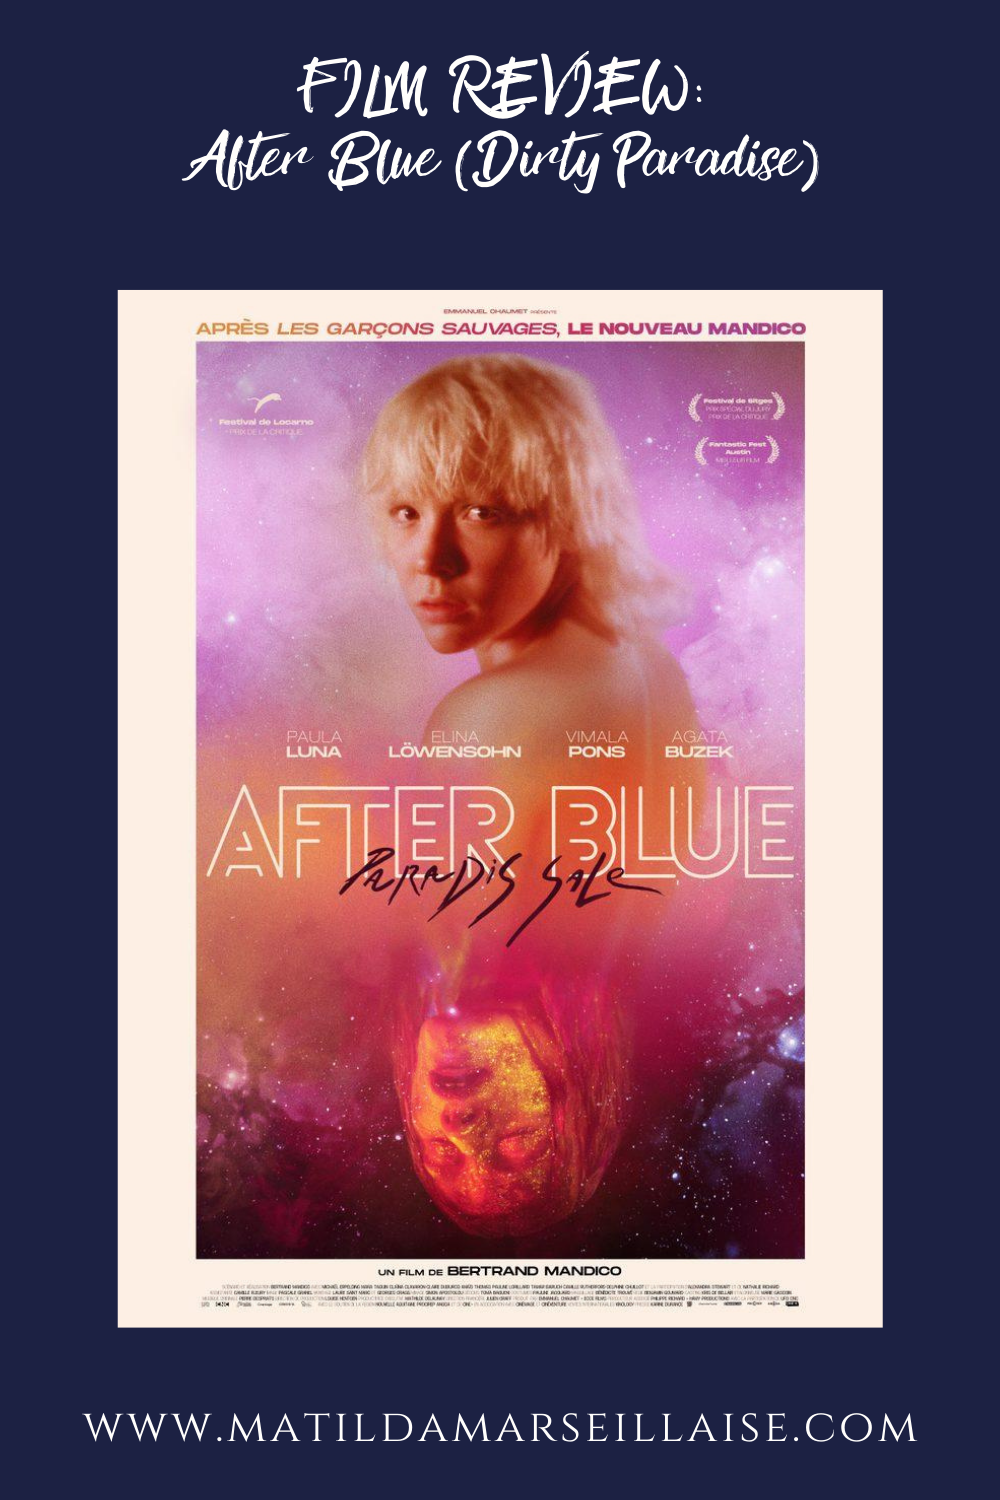 REVIEW: After Blue (Dirty Paradise): Soft-core porn under the guise of art  - Matilda Marseillaise